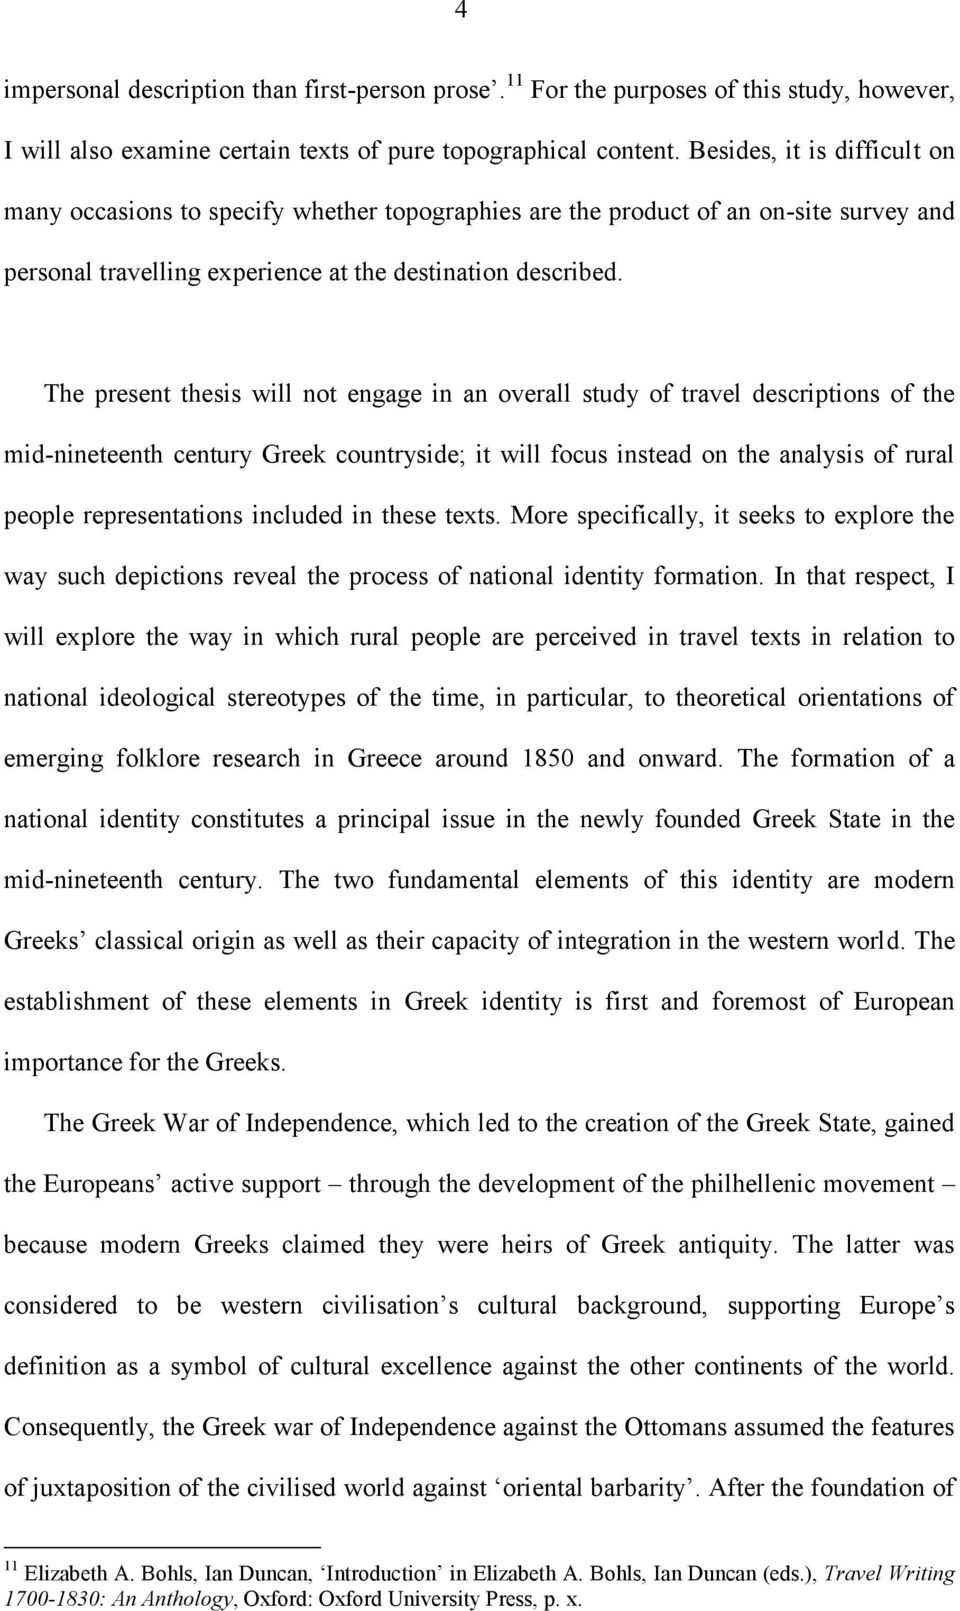 The present thesis will not engage in an overall study of travel descriptions of the mid-nineteenth century Greek countryside; it will focus instead on the analysis of rural people representations